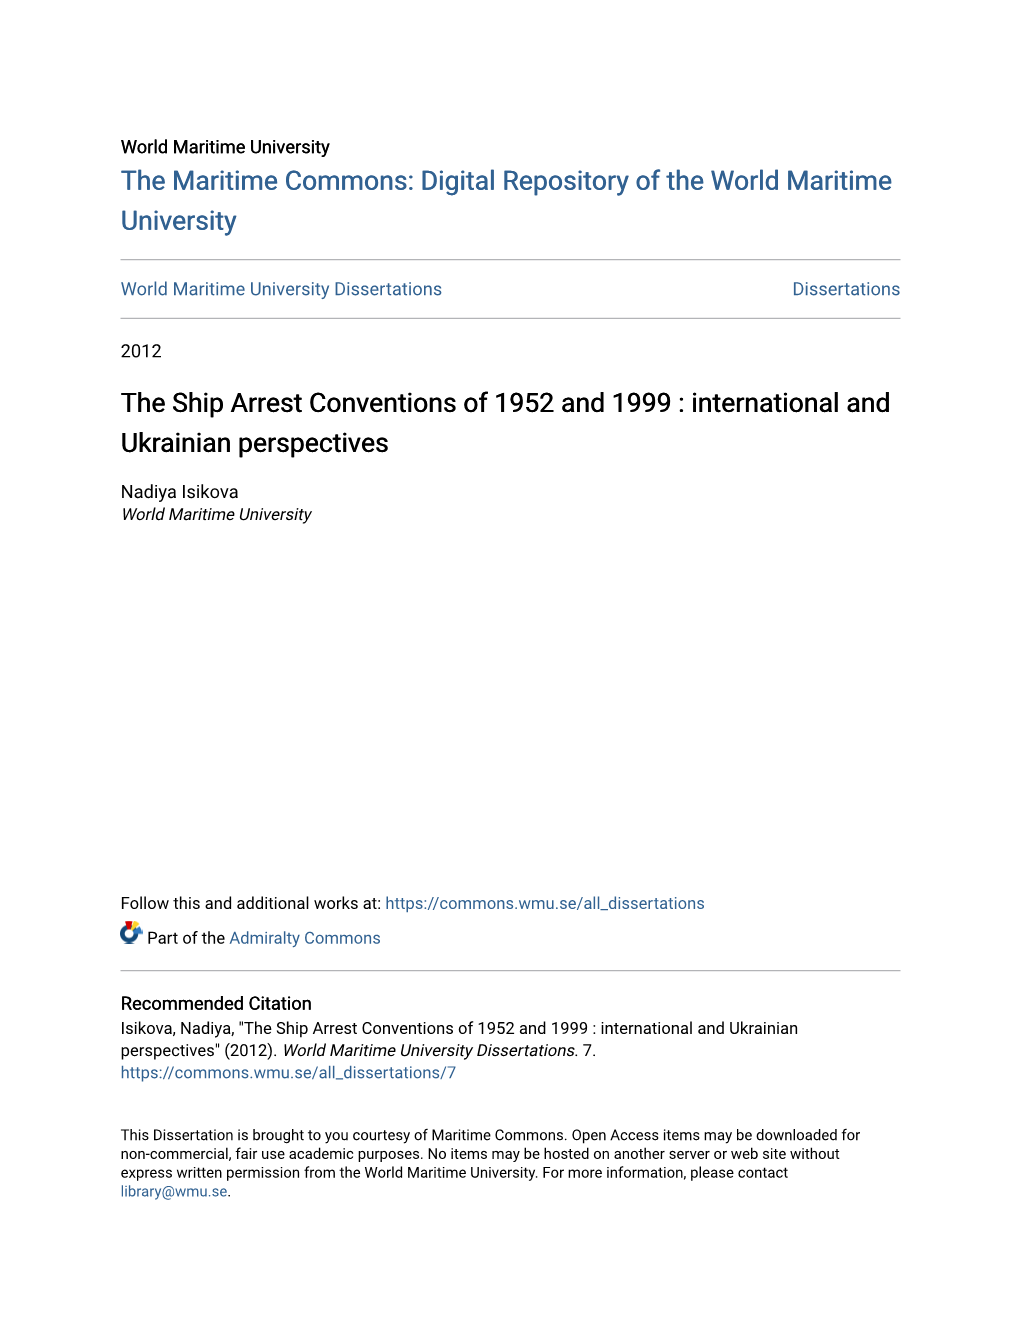 The Ship Arrest Conventions of 1952 and 1999 : International and Ukrainian Perspectives